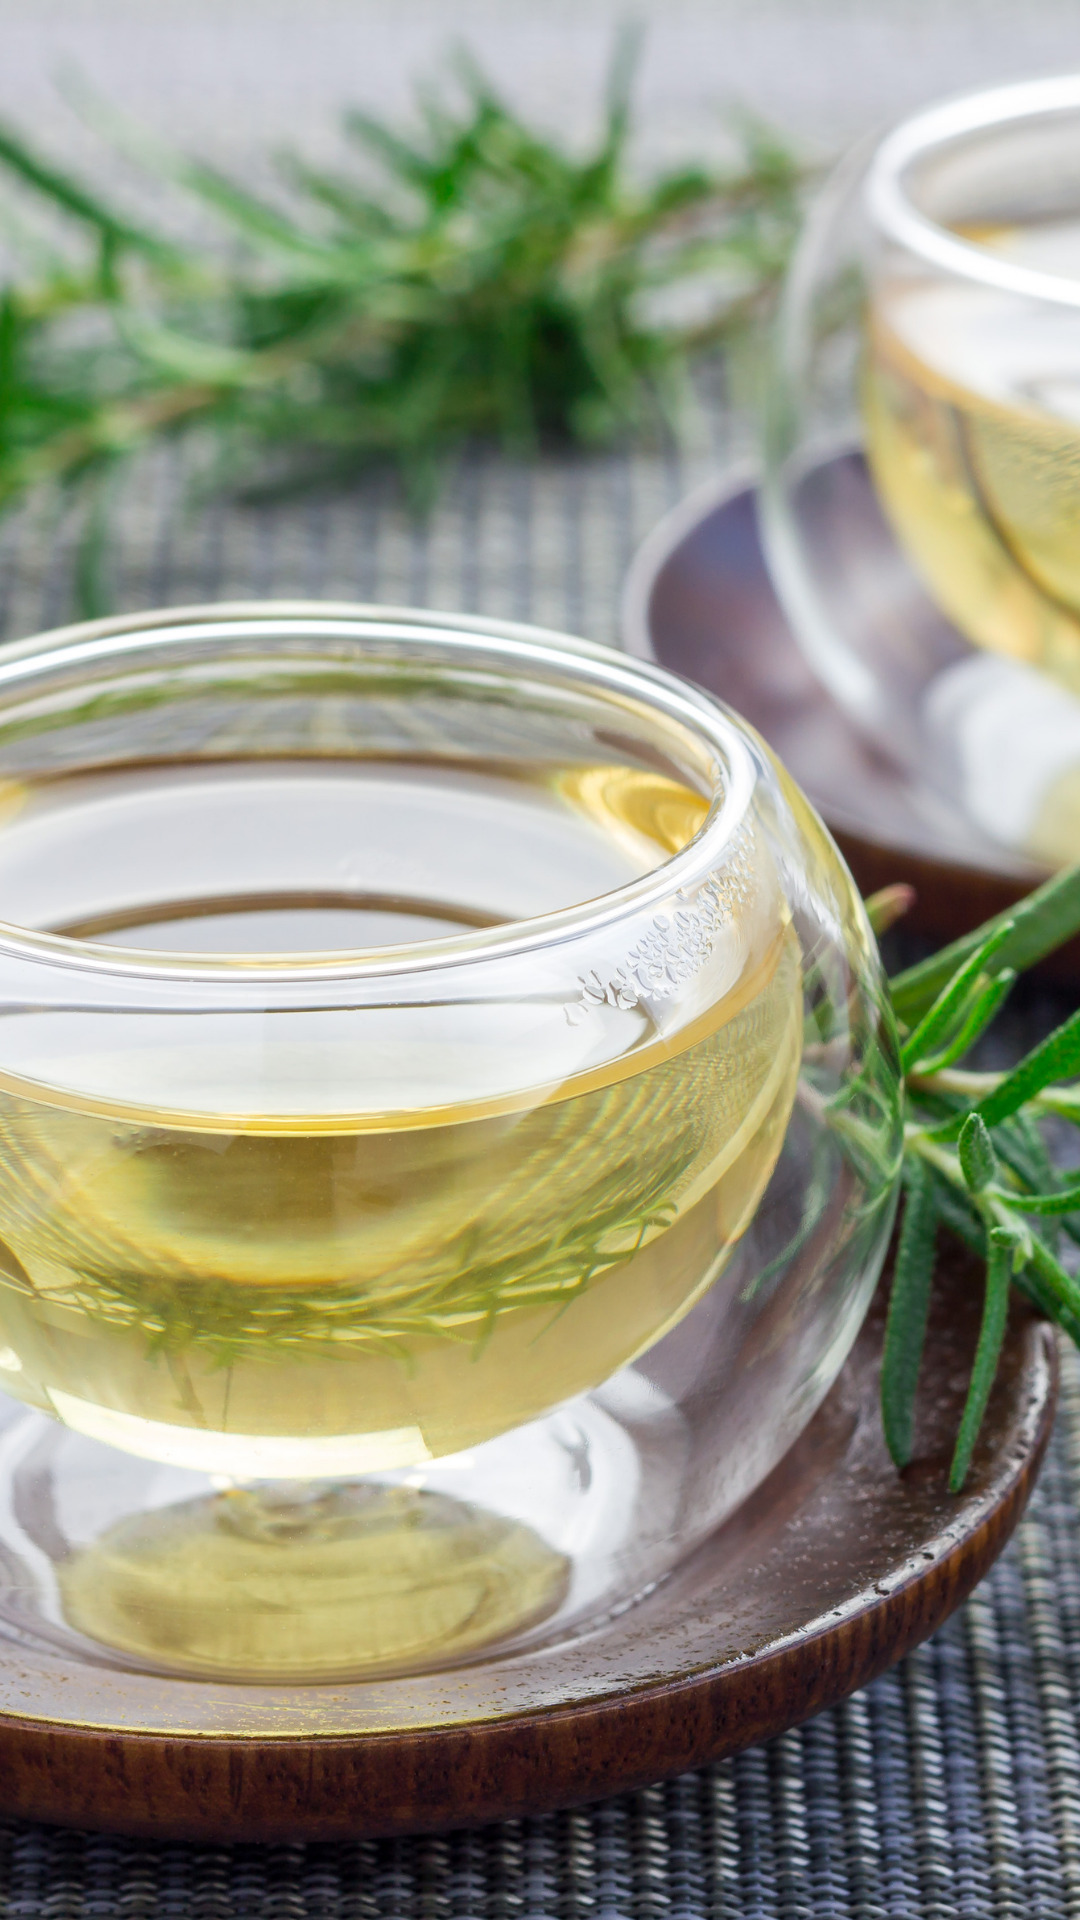 How To Use Rosemary Water For Hair Growth